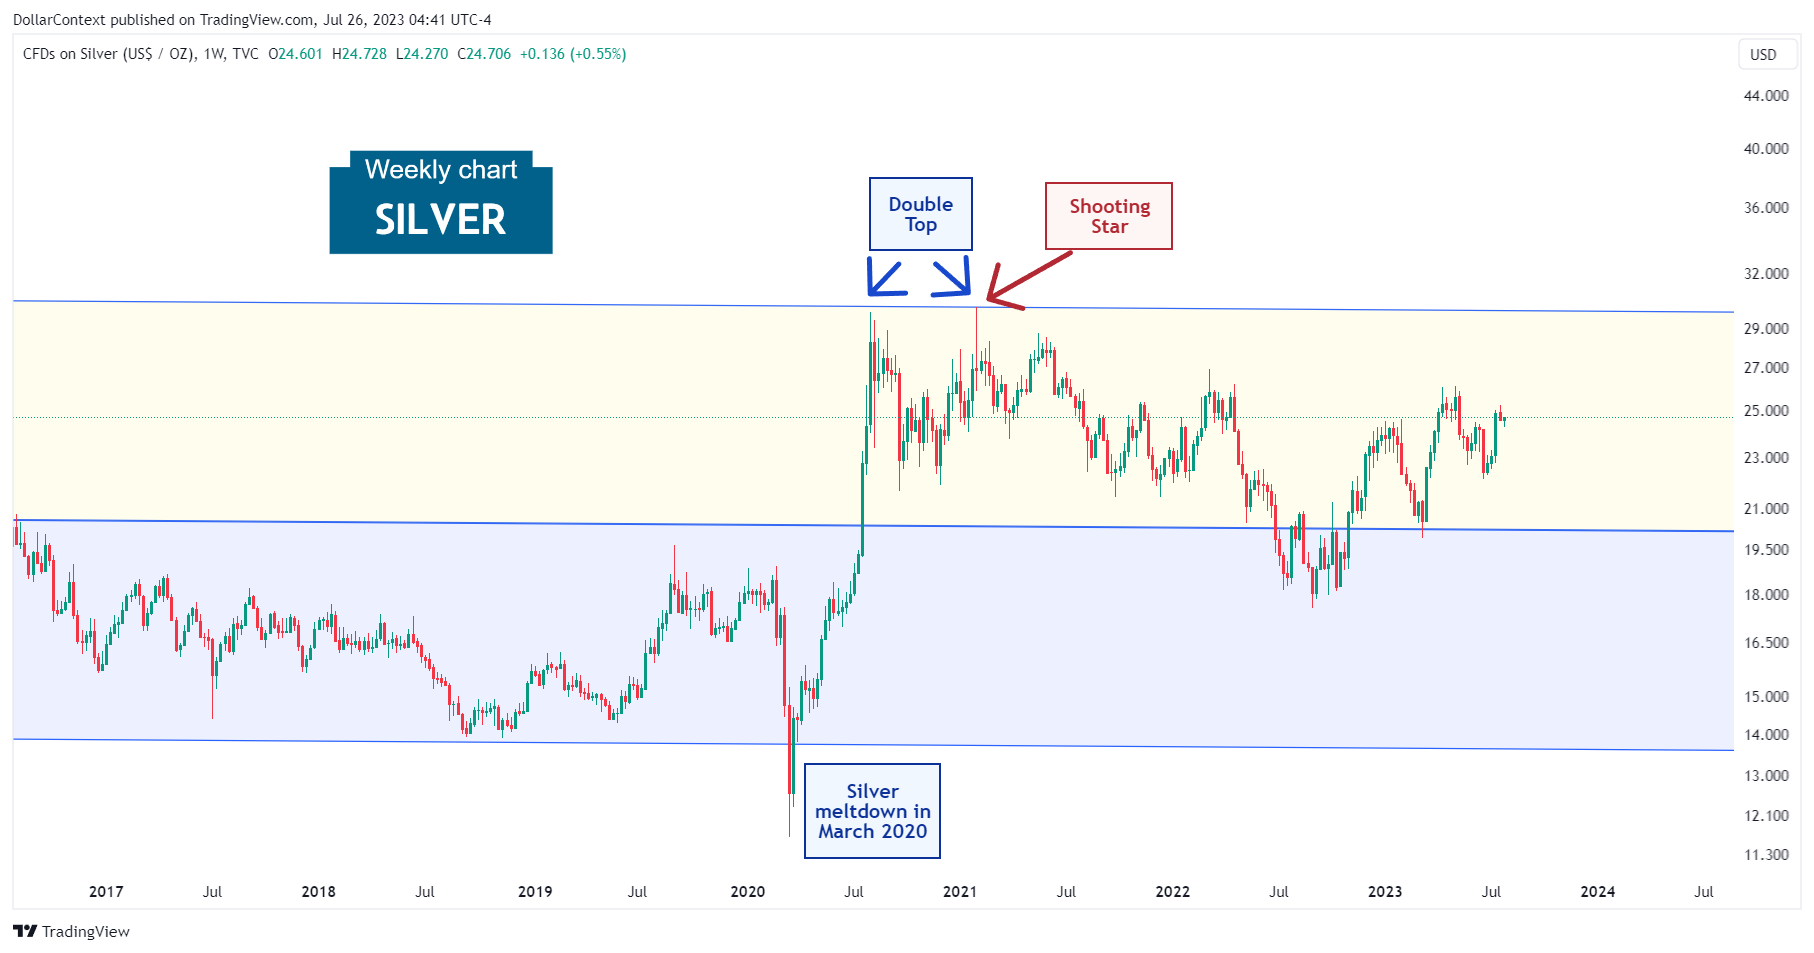 Silver: Strong Uptrend in 2020